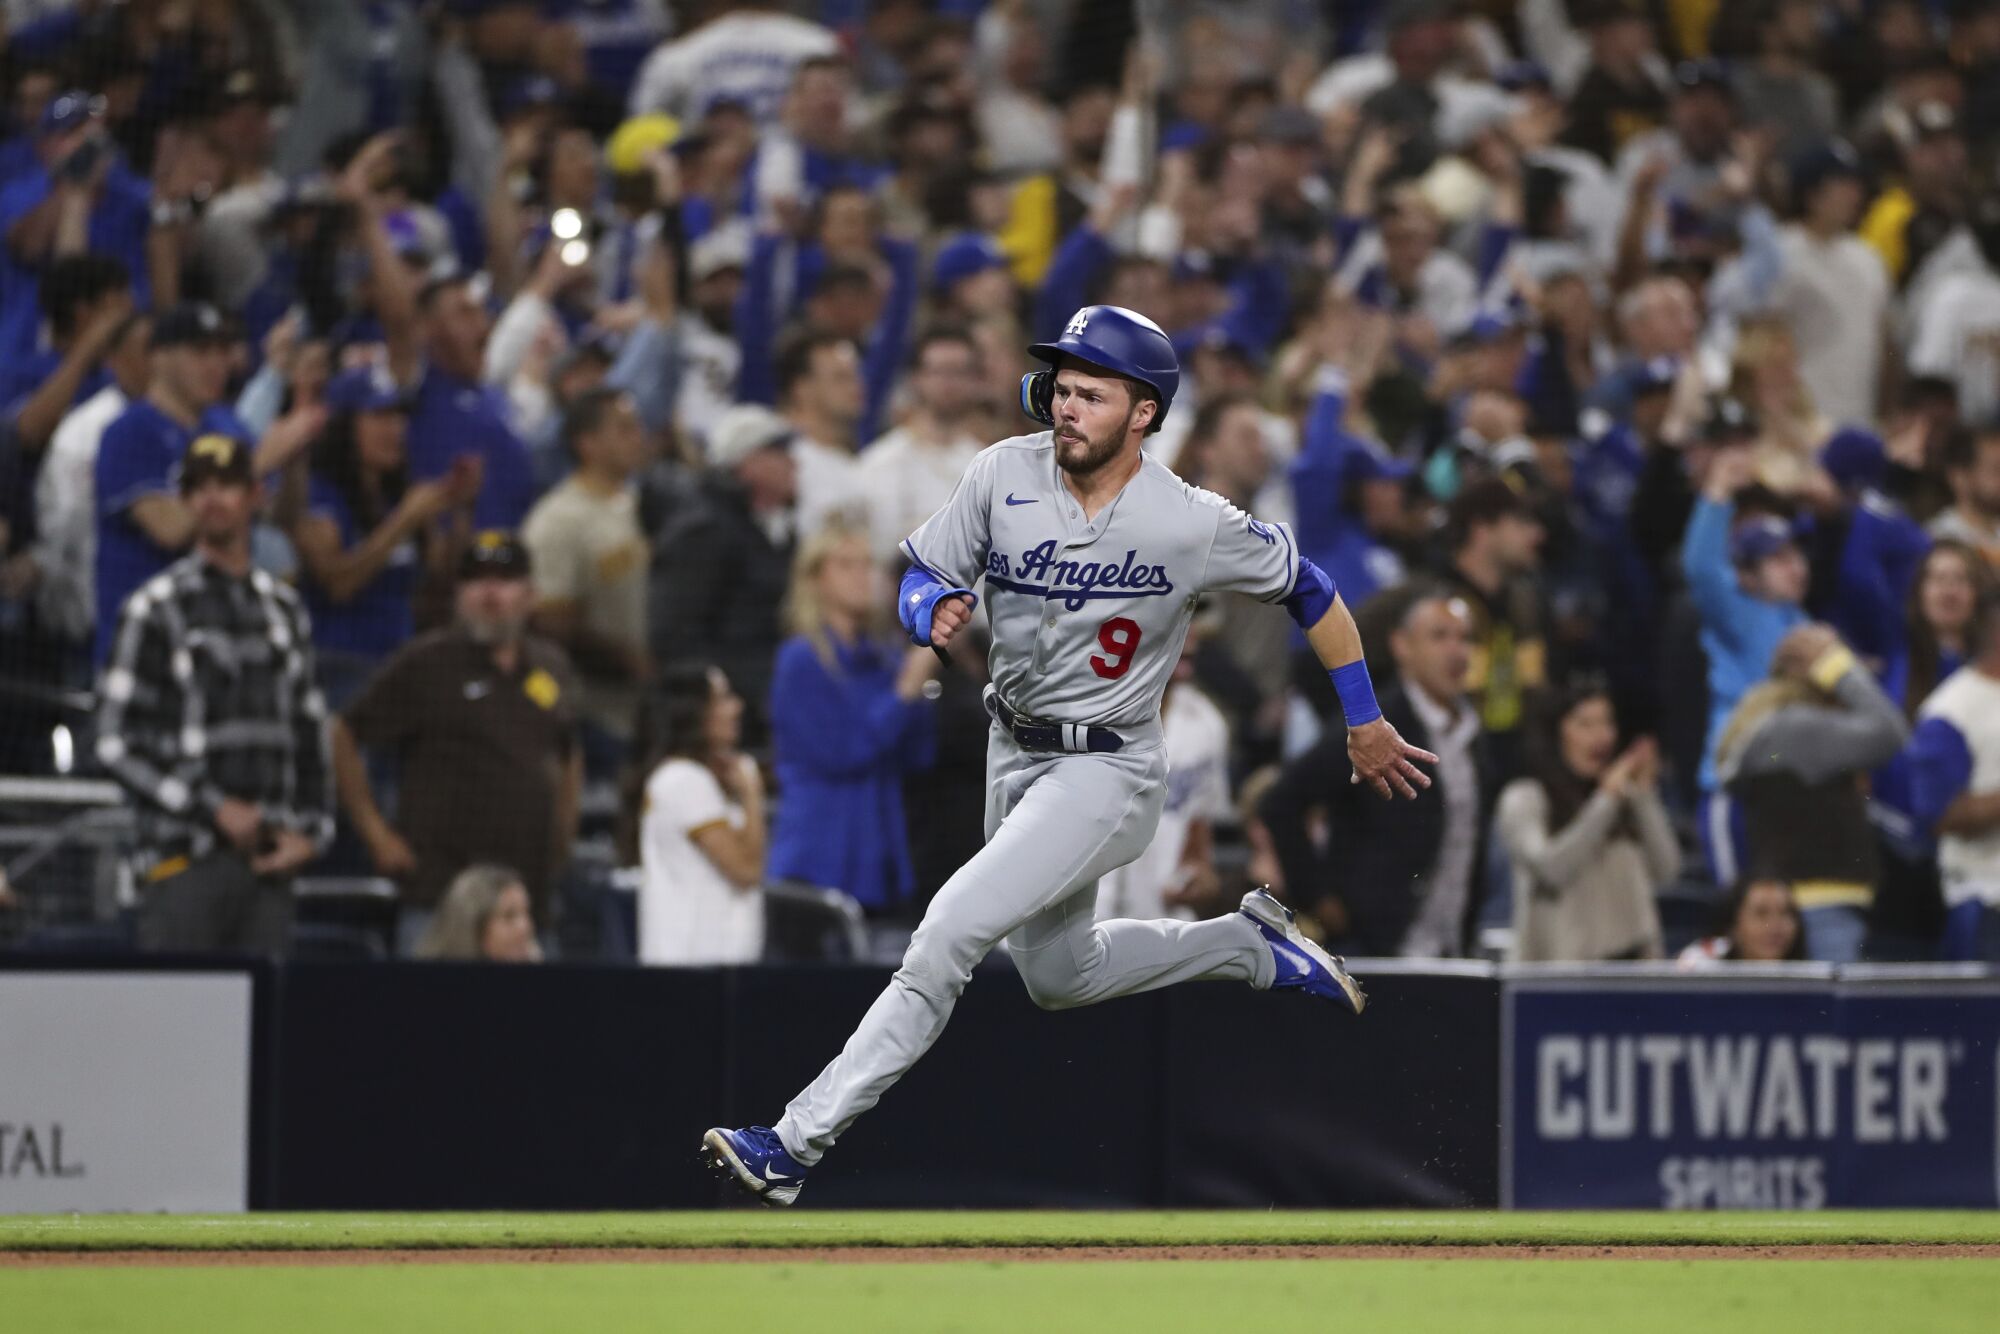 Dodgers' Gavin Lux runs towards home plate during a game.